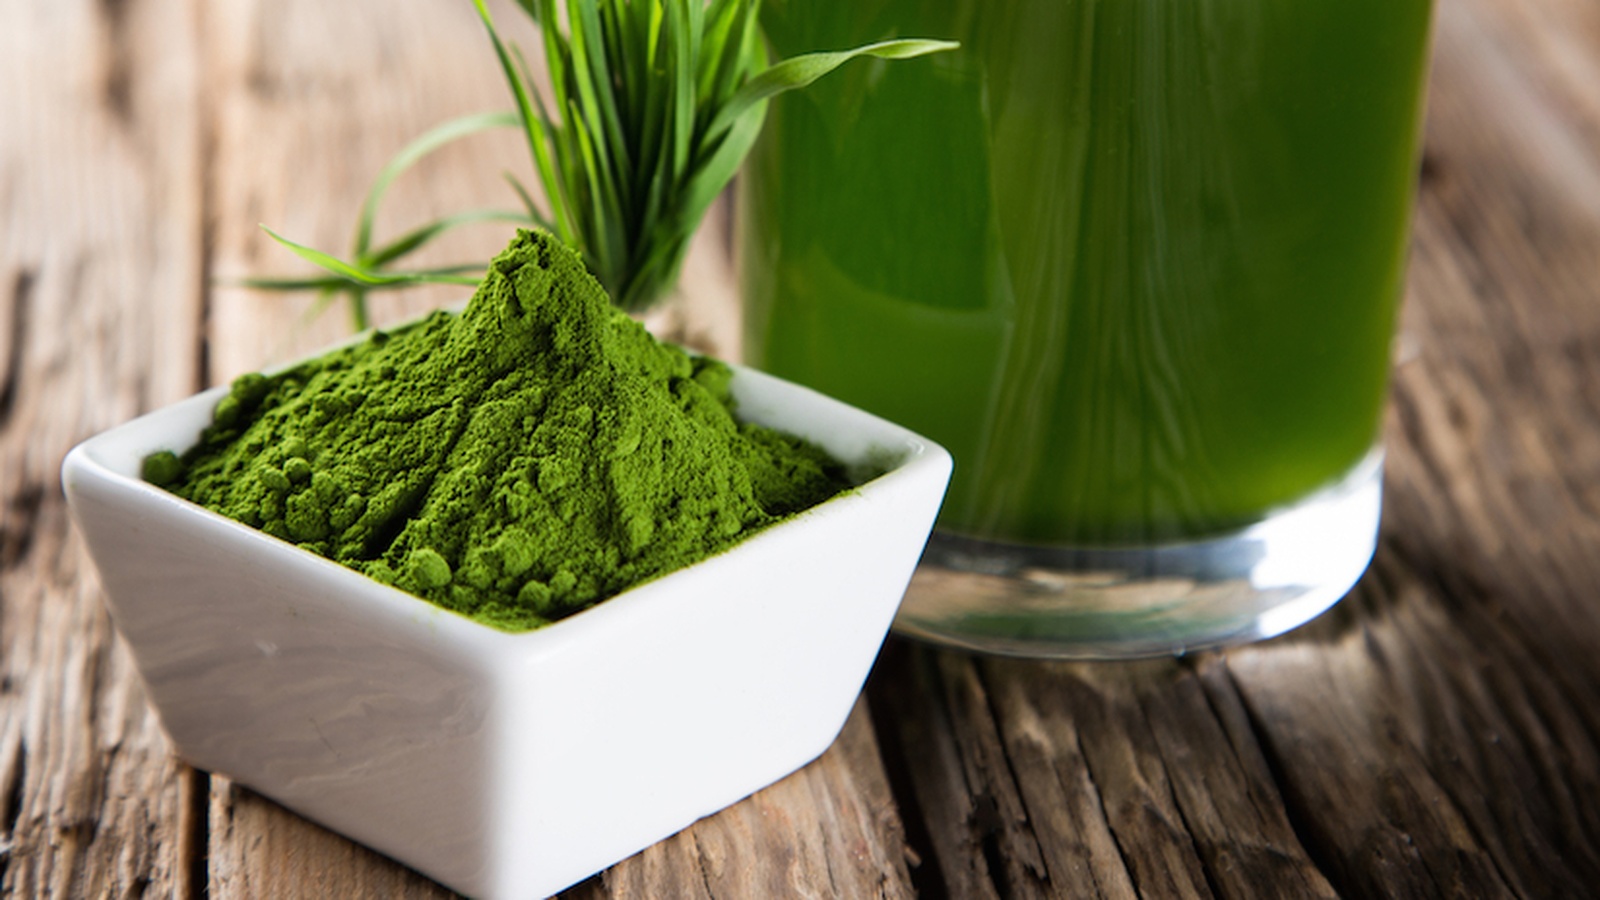 Therapeutic Uses of Spirulina for Treating Radiation Poisoning